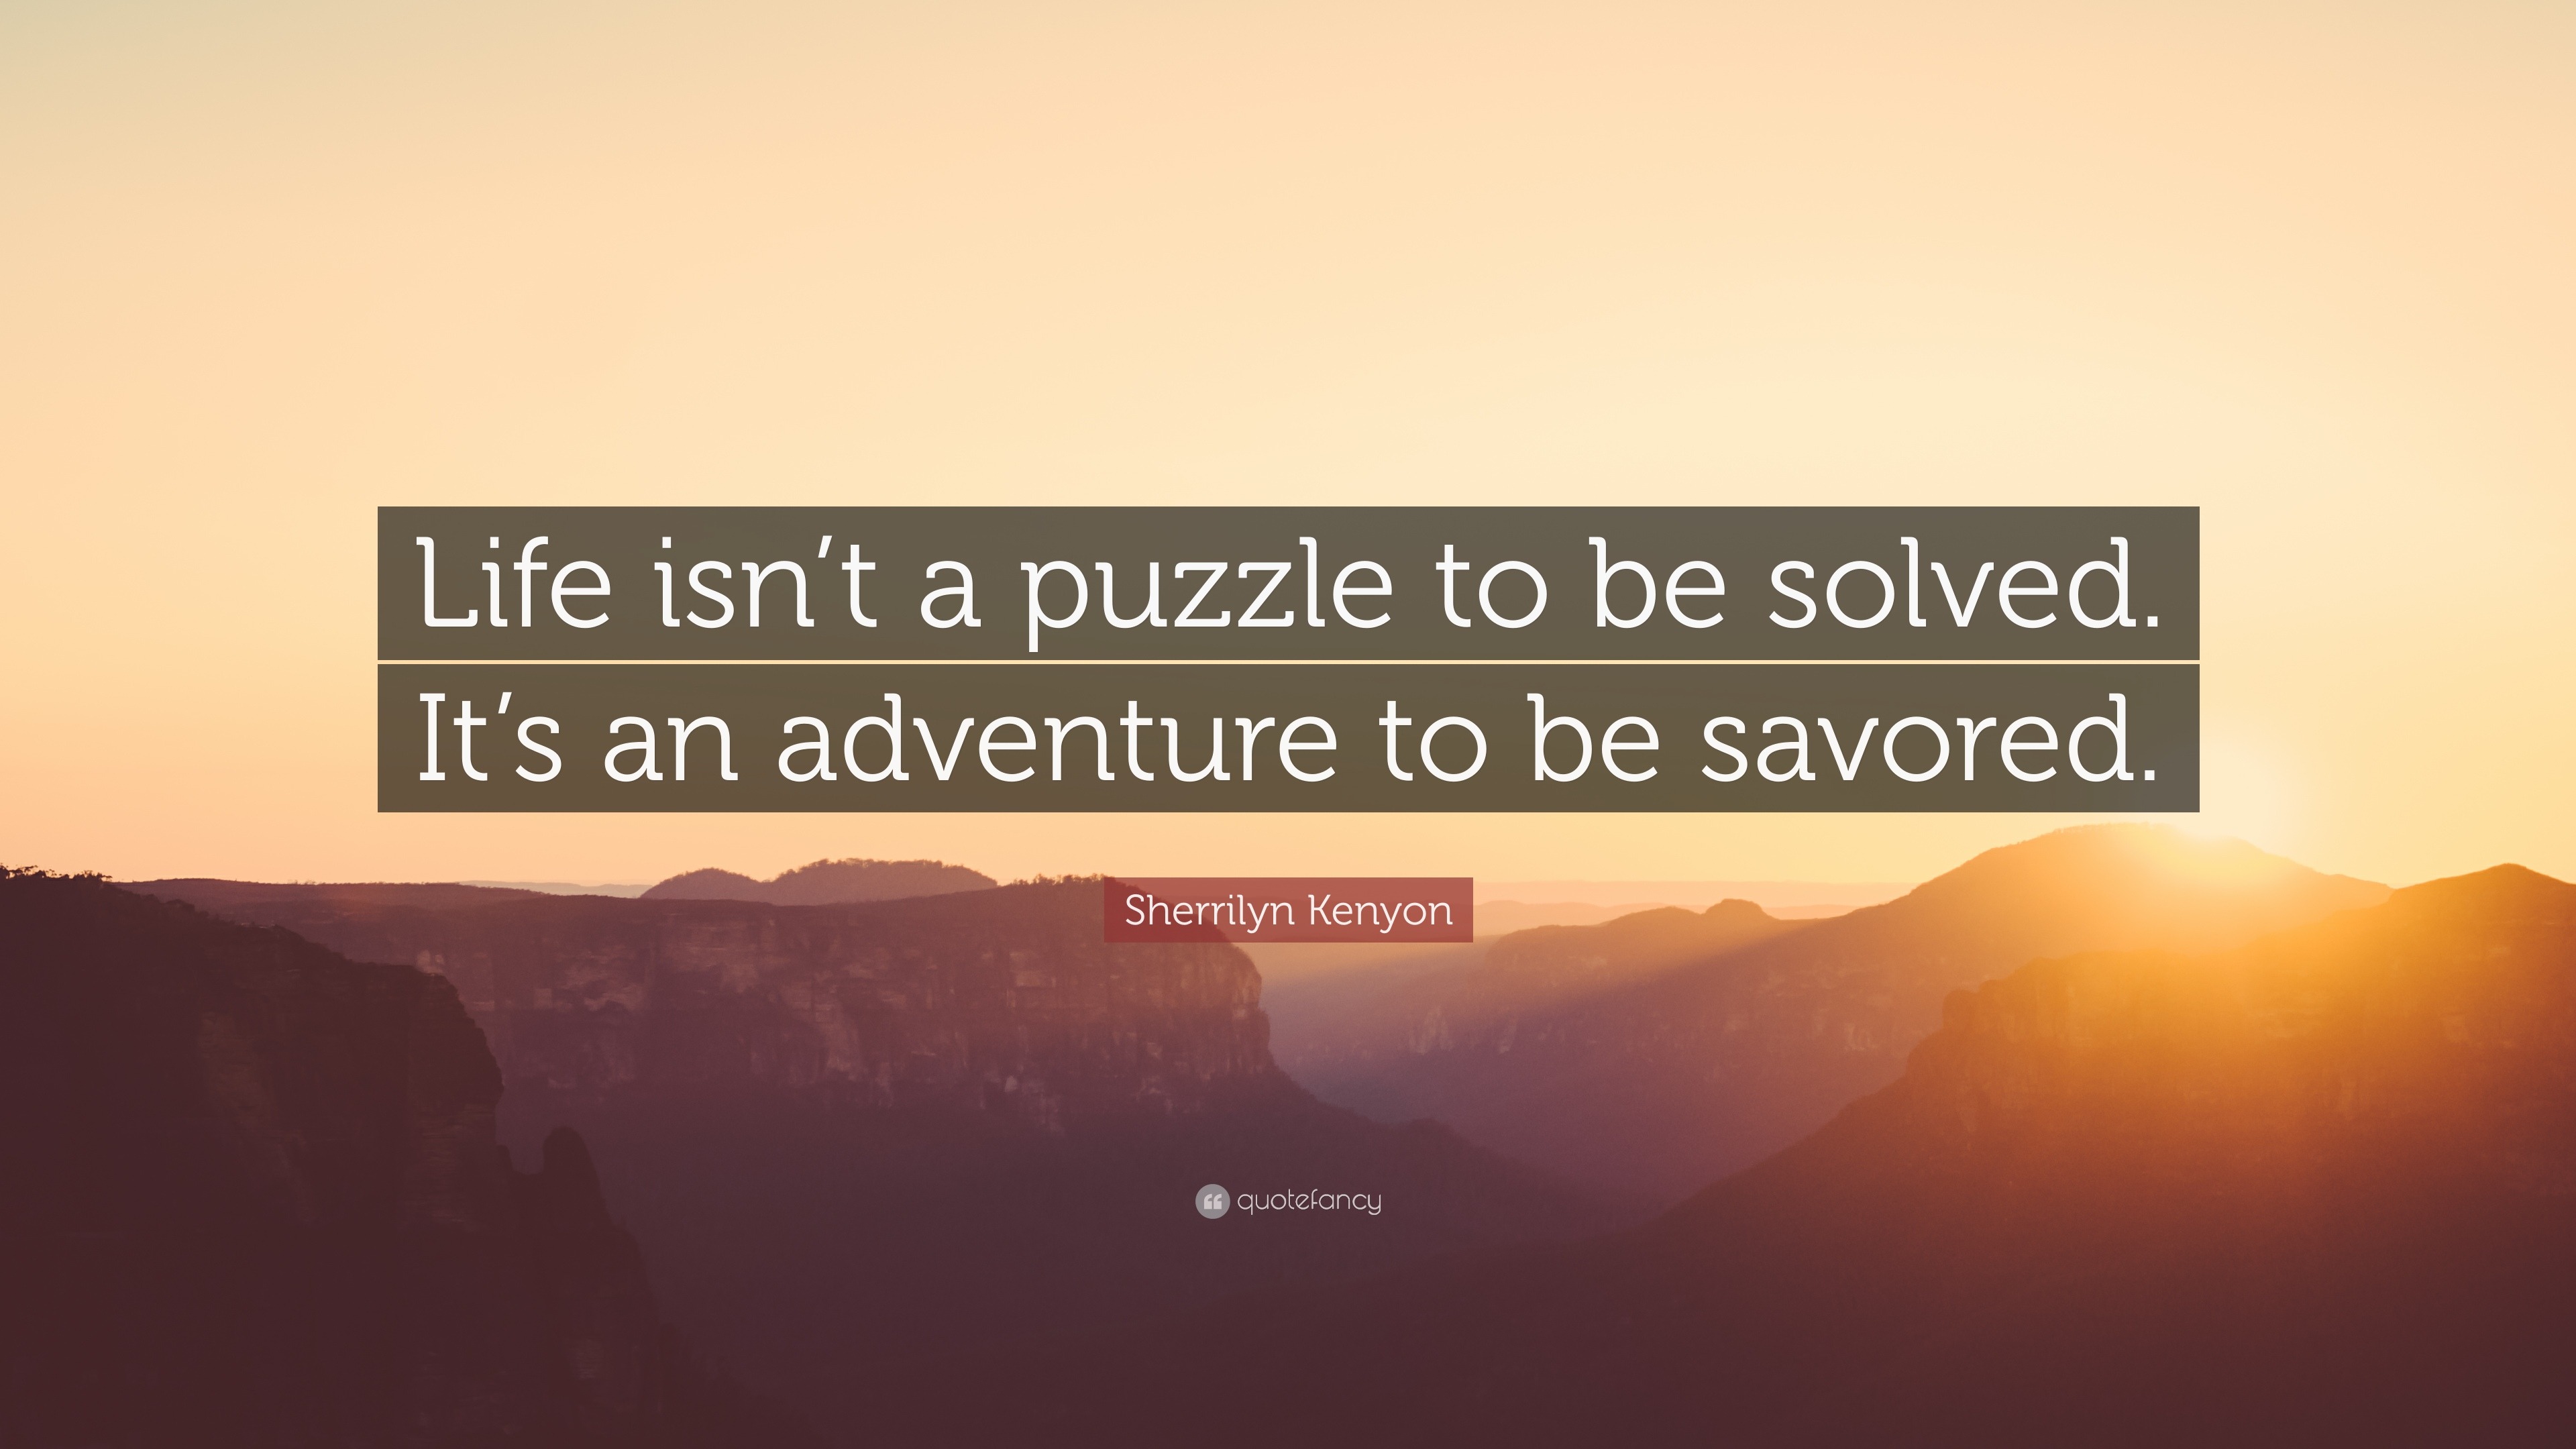 Sherrilyn Kenyon Quote: “Life Isn't A Puzzle To Be Solved. It's An Adventure To Be